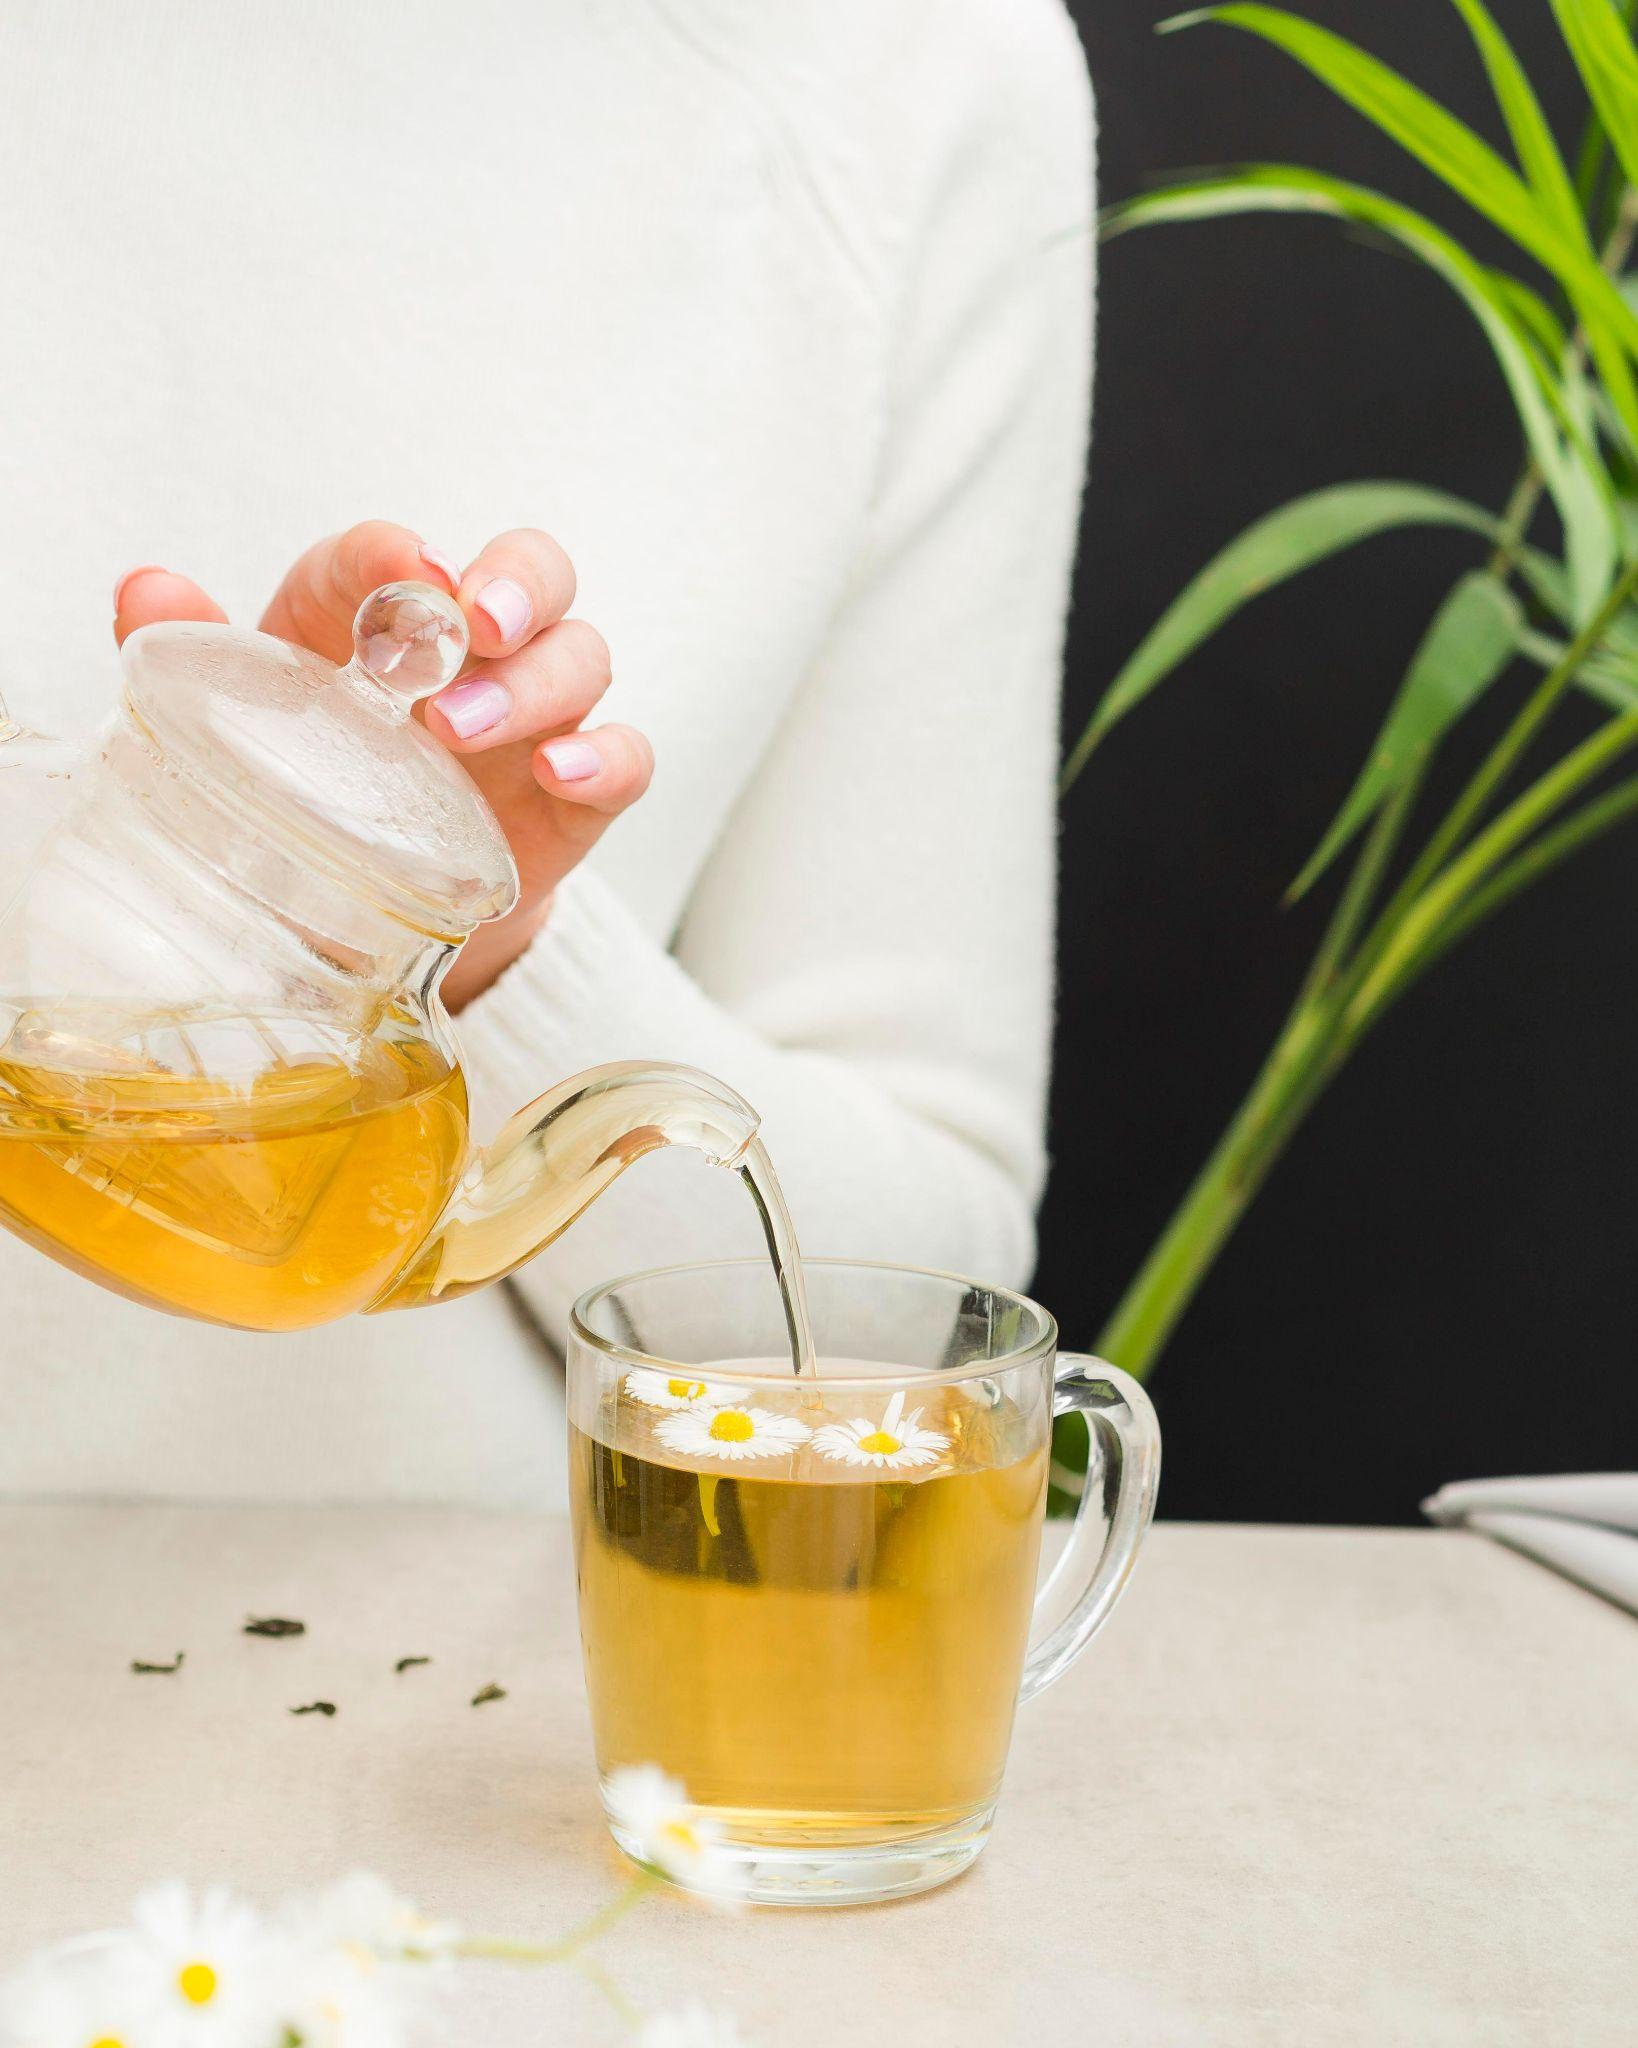 The Art of Tea Blending – Here’s How You Can Create Your Own Custom Mixes-Image 3